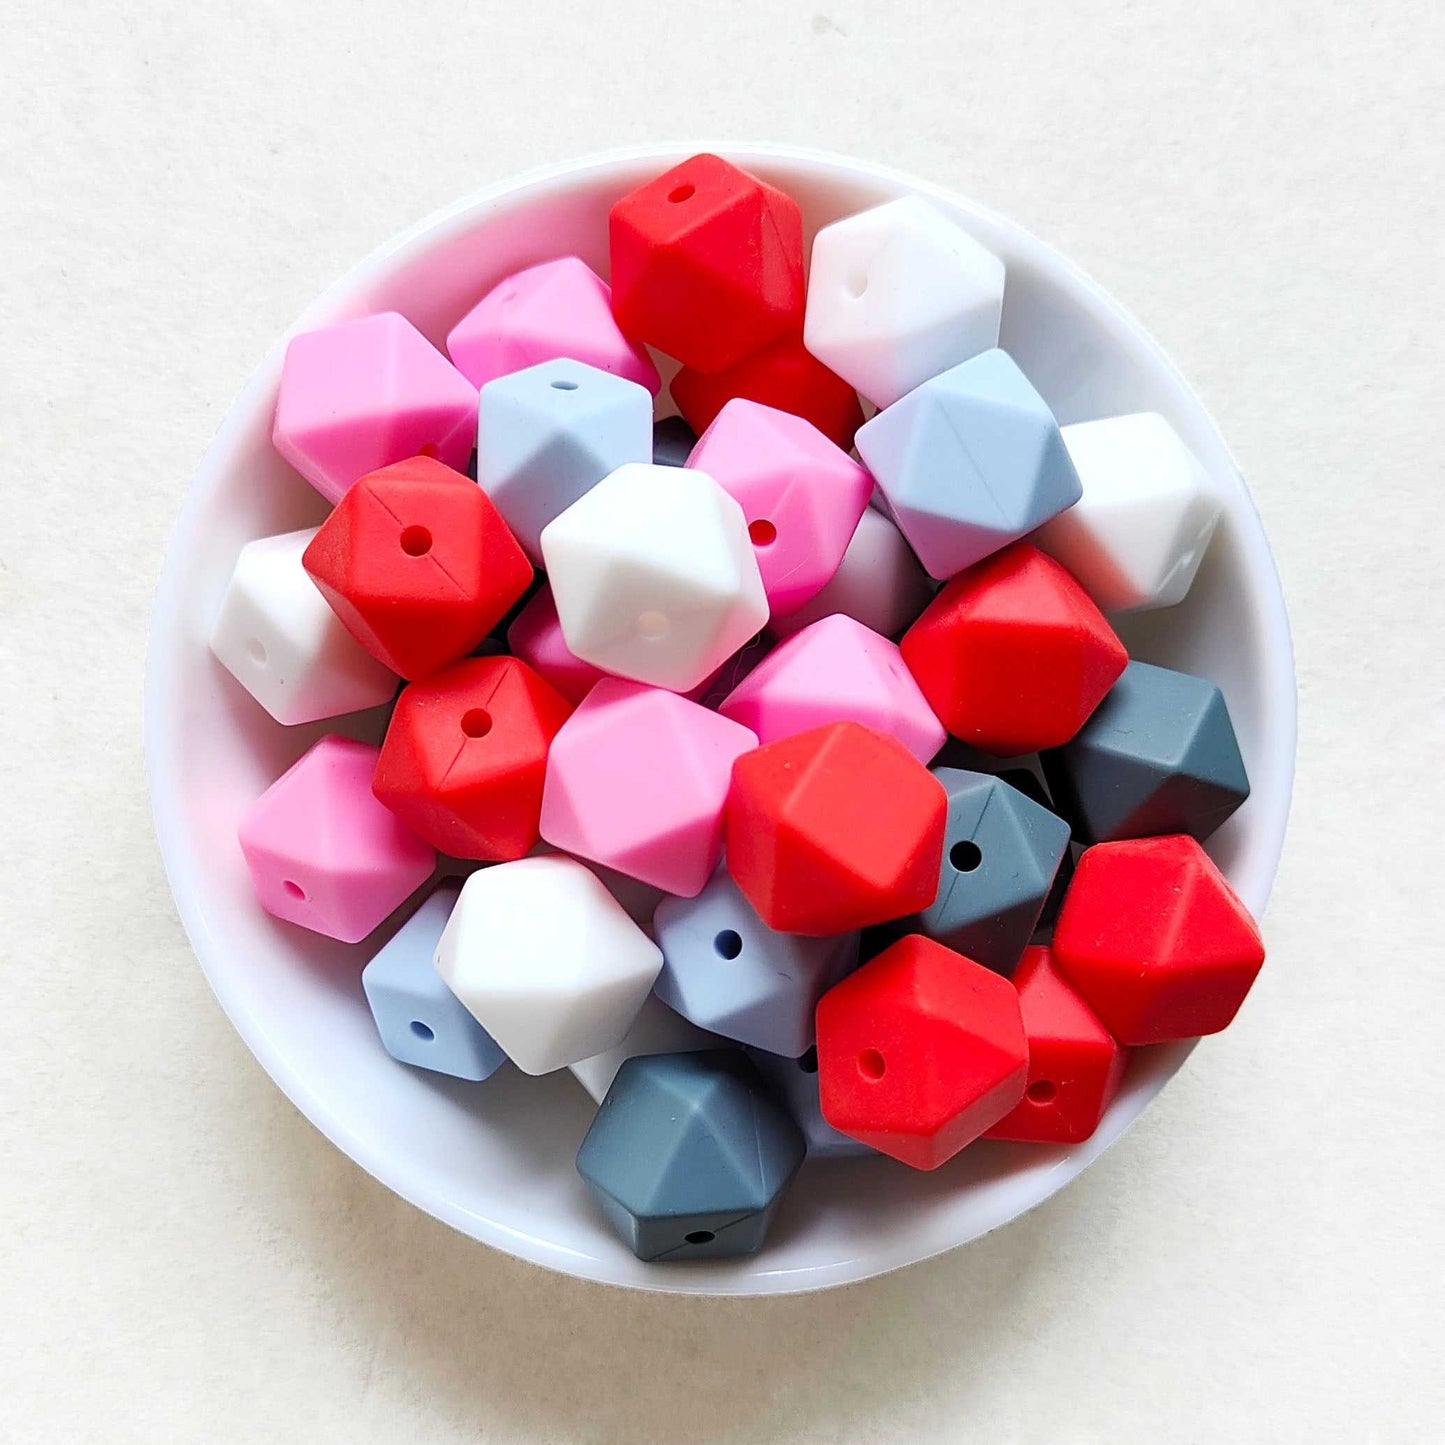 14mm Mix 5 Colors Hexagon Silicone Beads